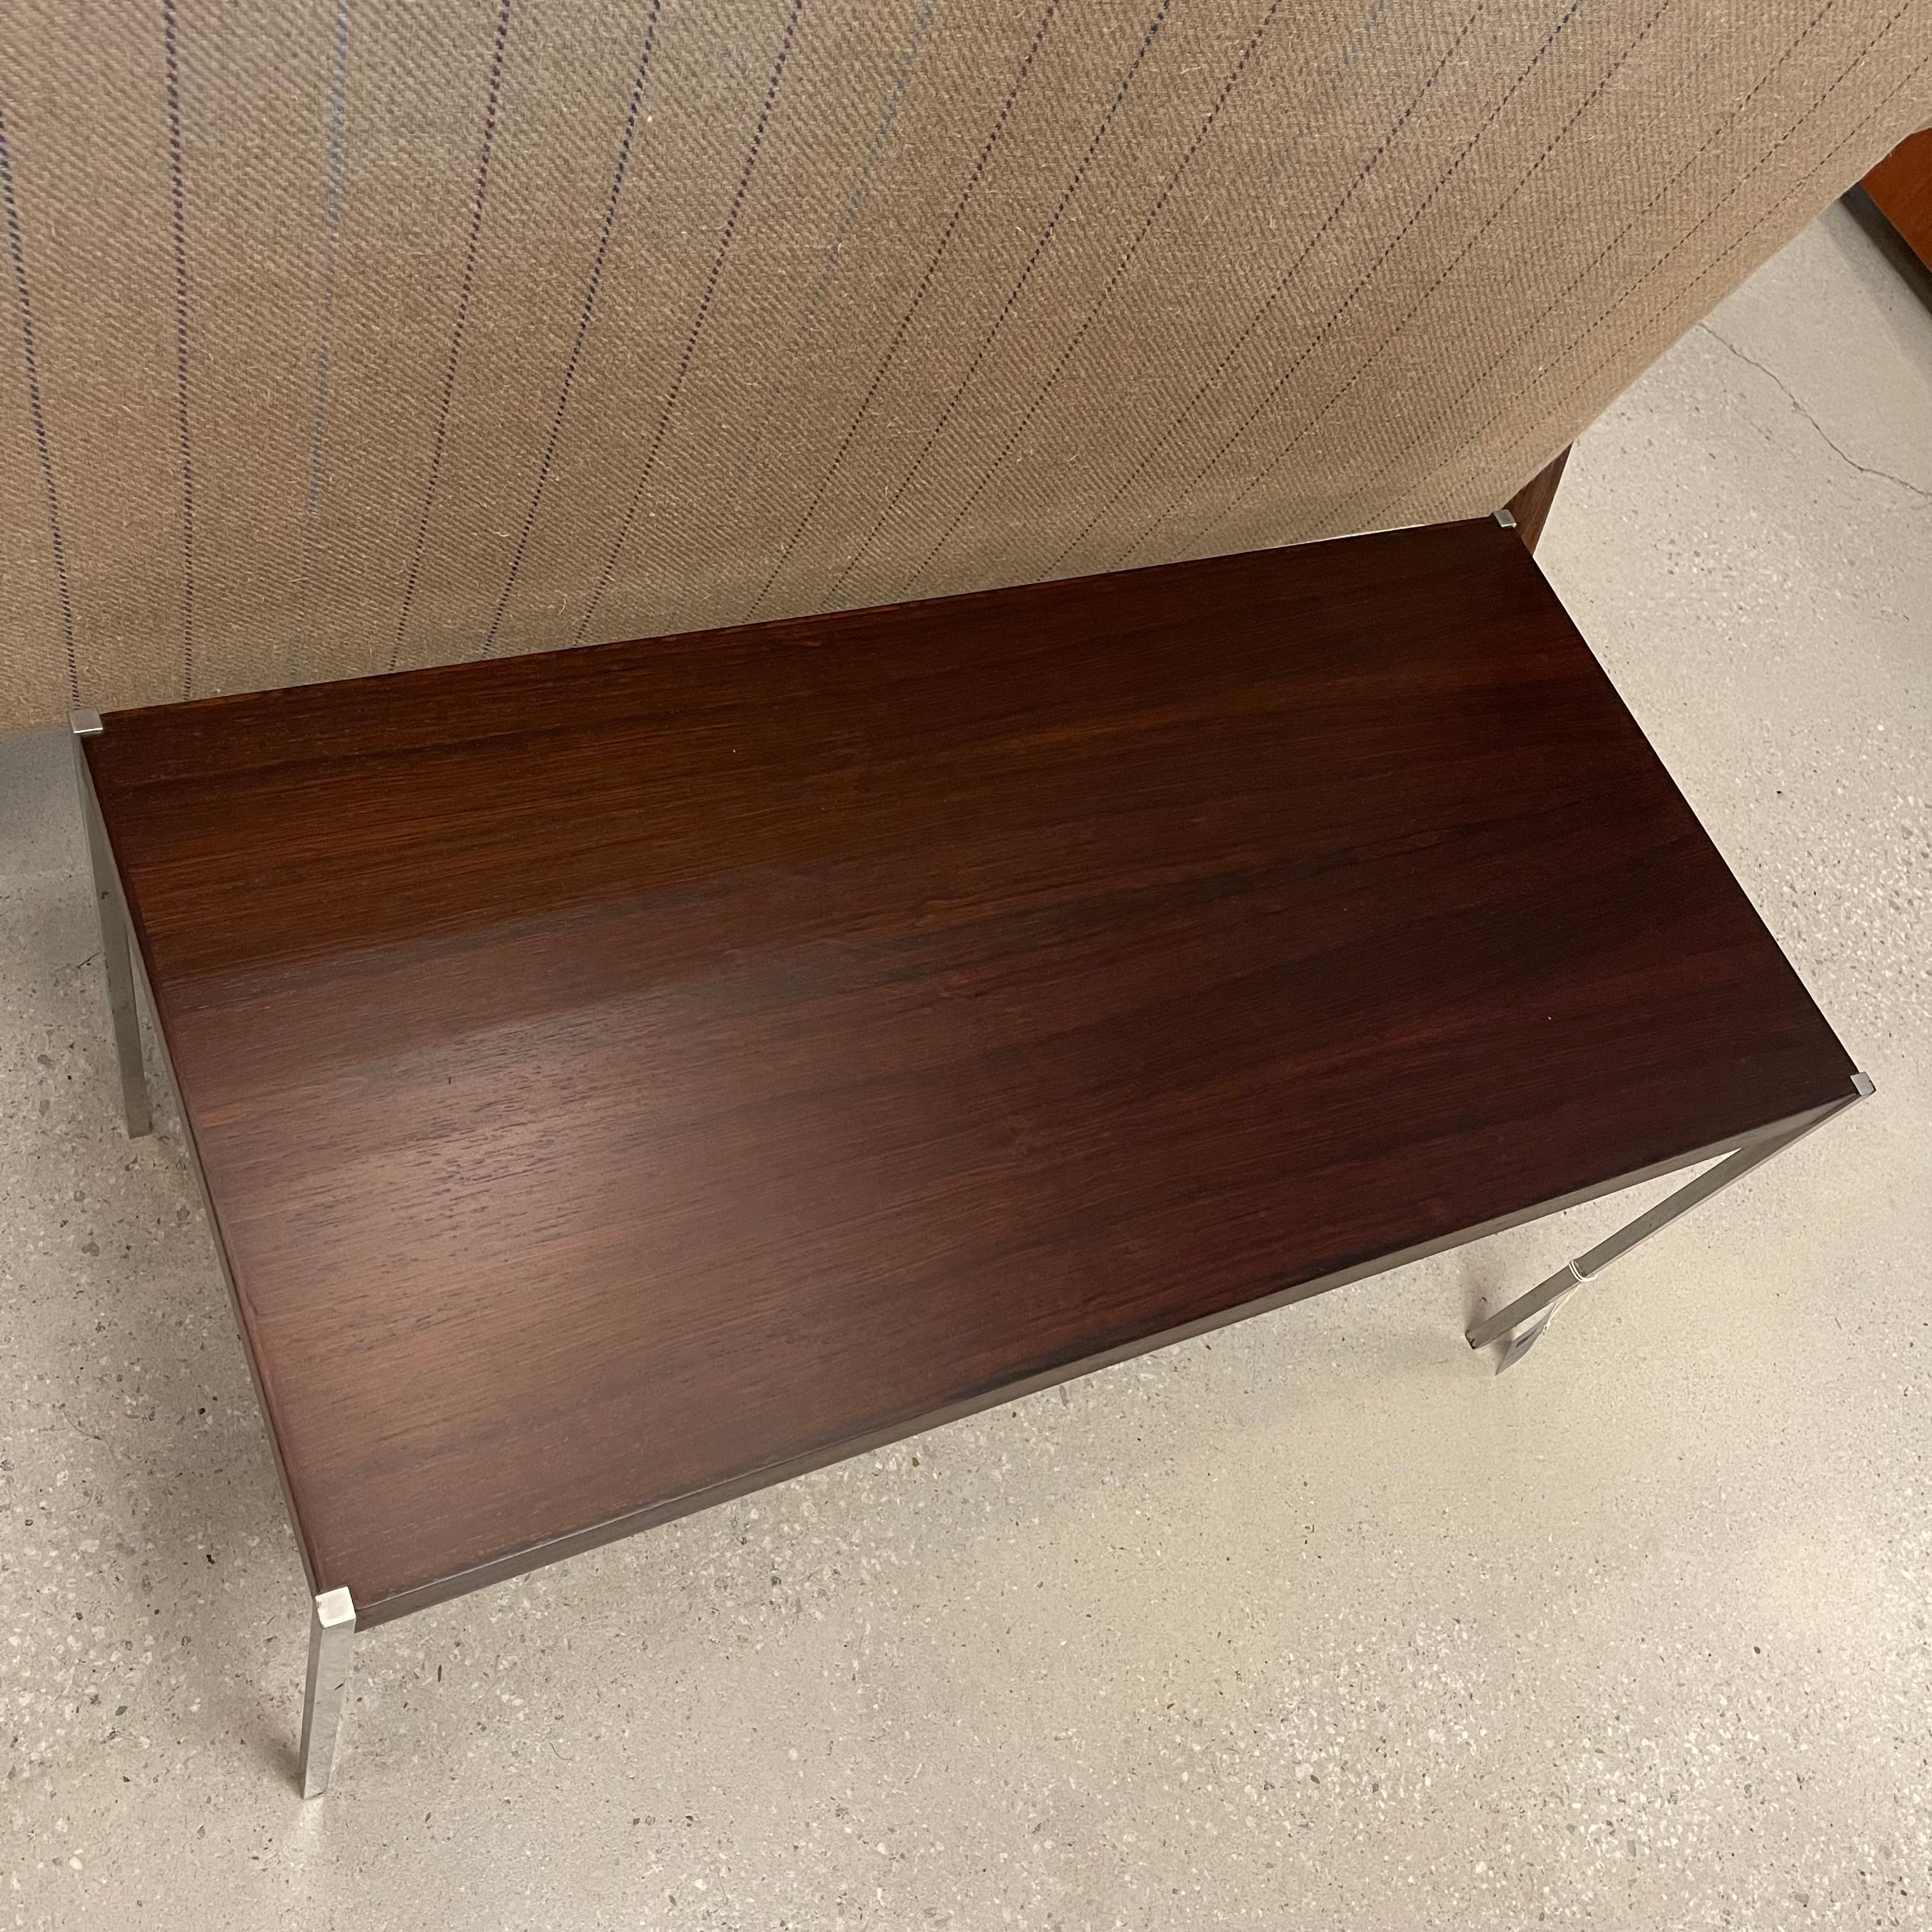 Rosewood & Steel Coffee Table By Uno & Östen Kristiansson For Luxus In Good Condition For Sale In Brooklyn, NY